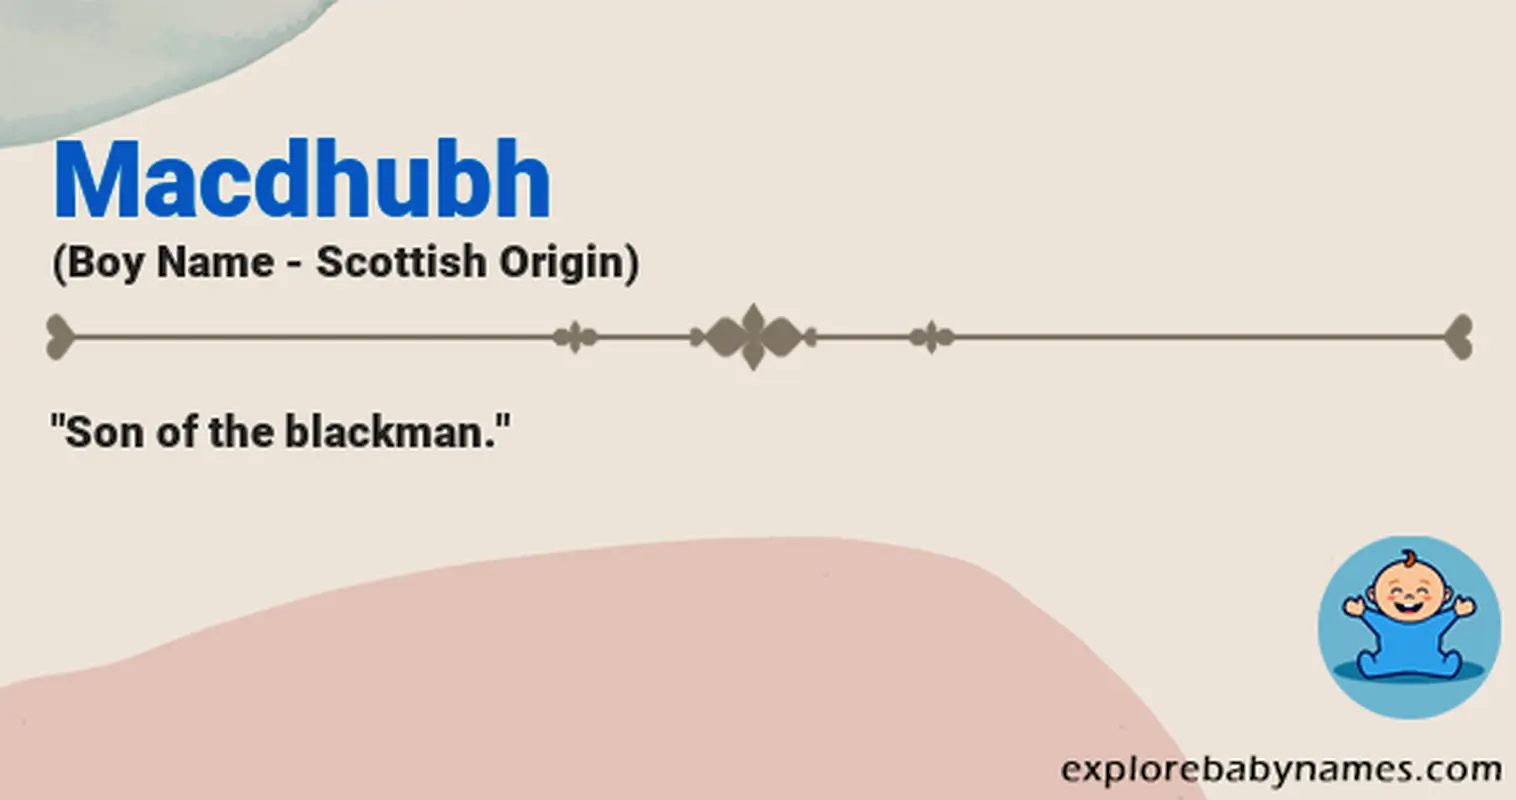 Meaning of Macdhubh